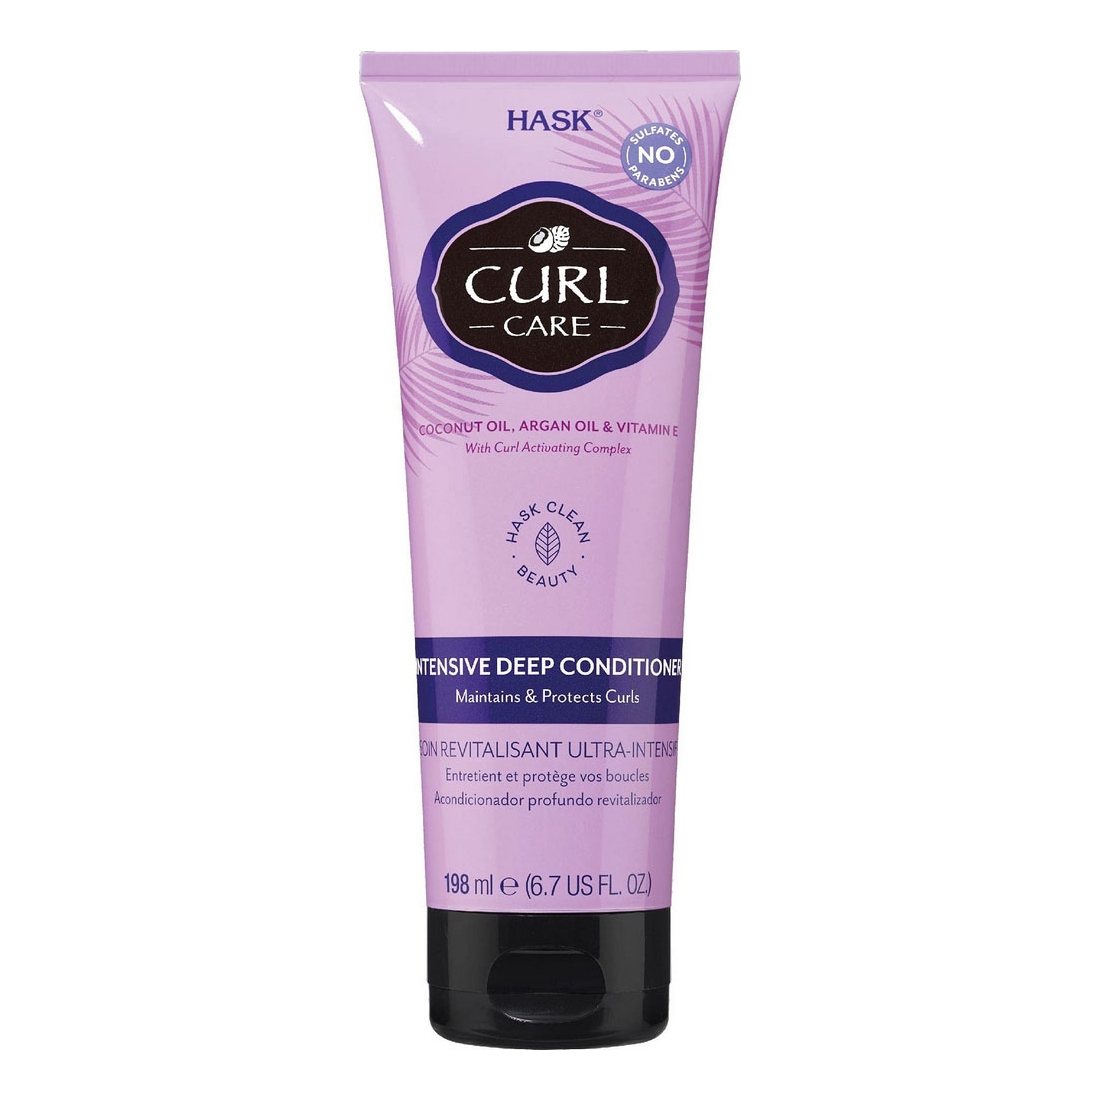 Defined Curls Conditioner HASK Curl Care (198 ml)